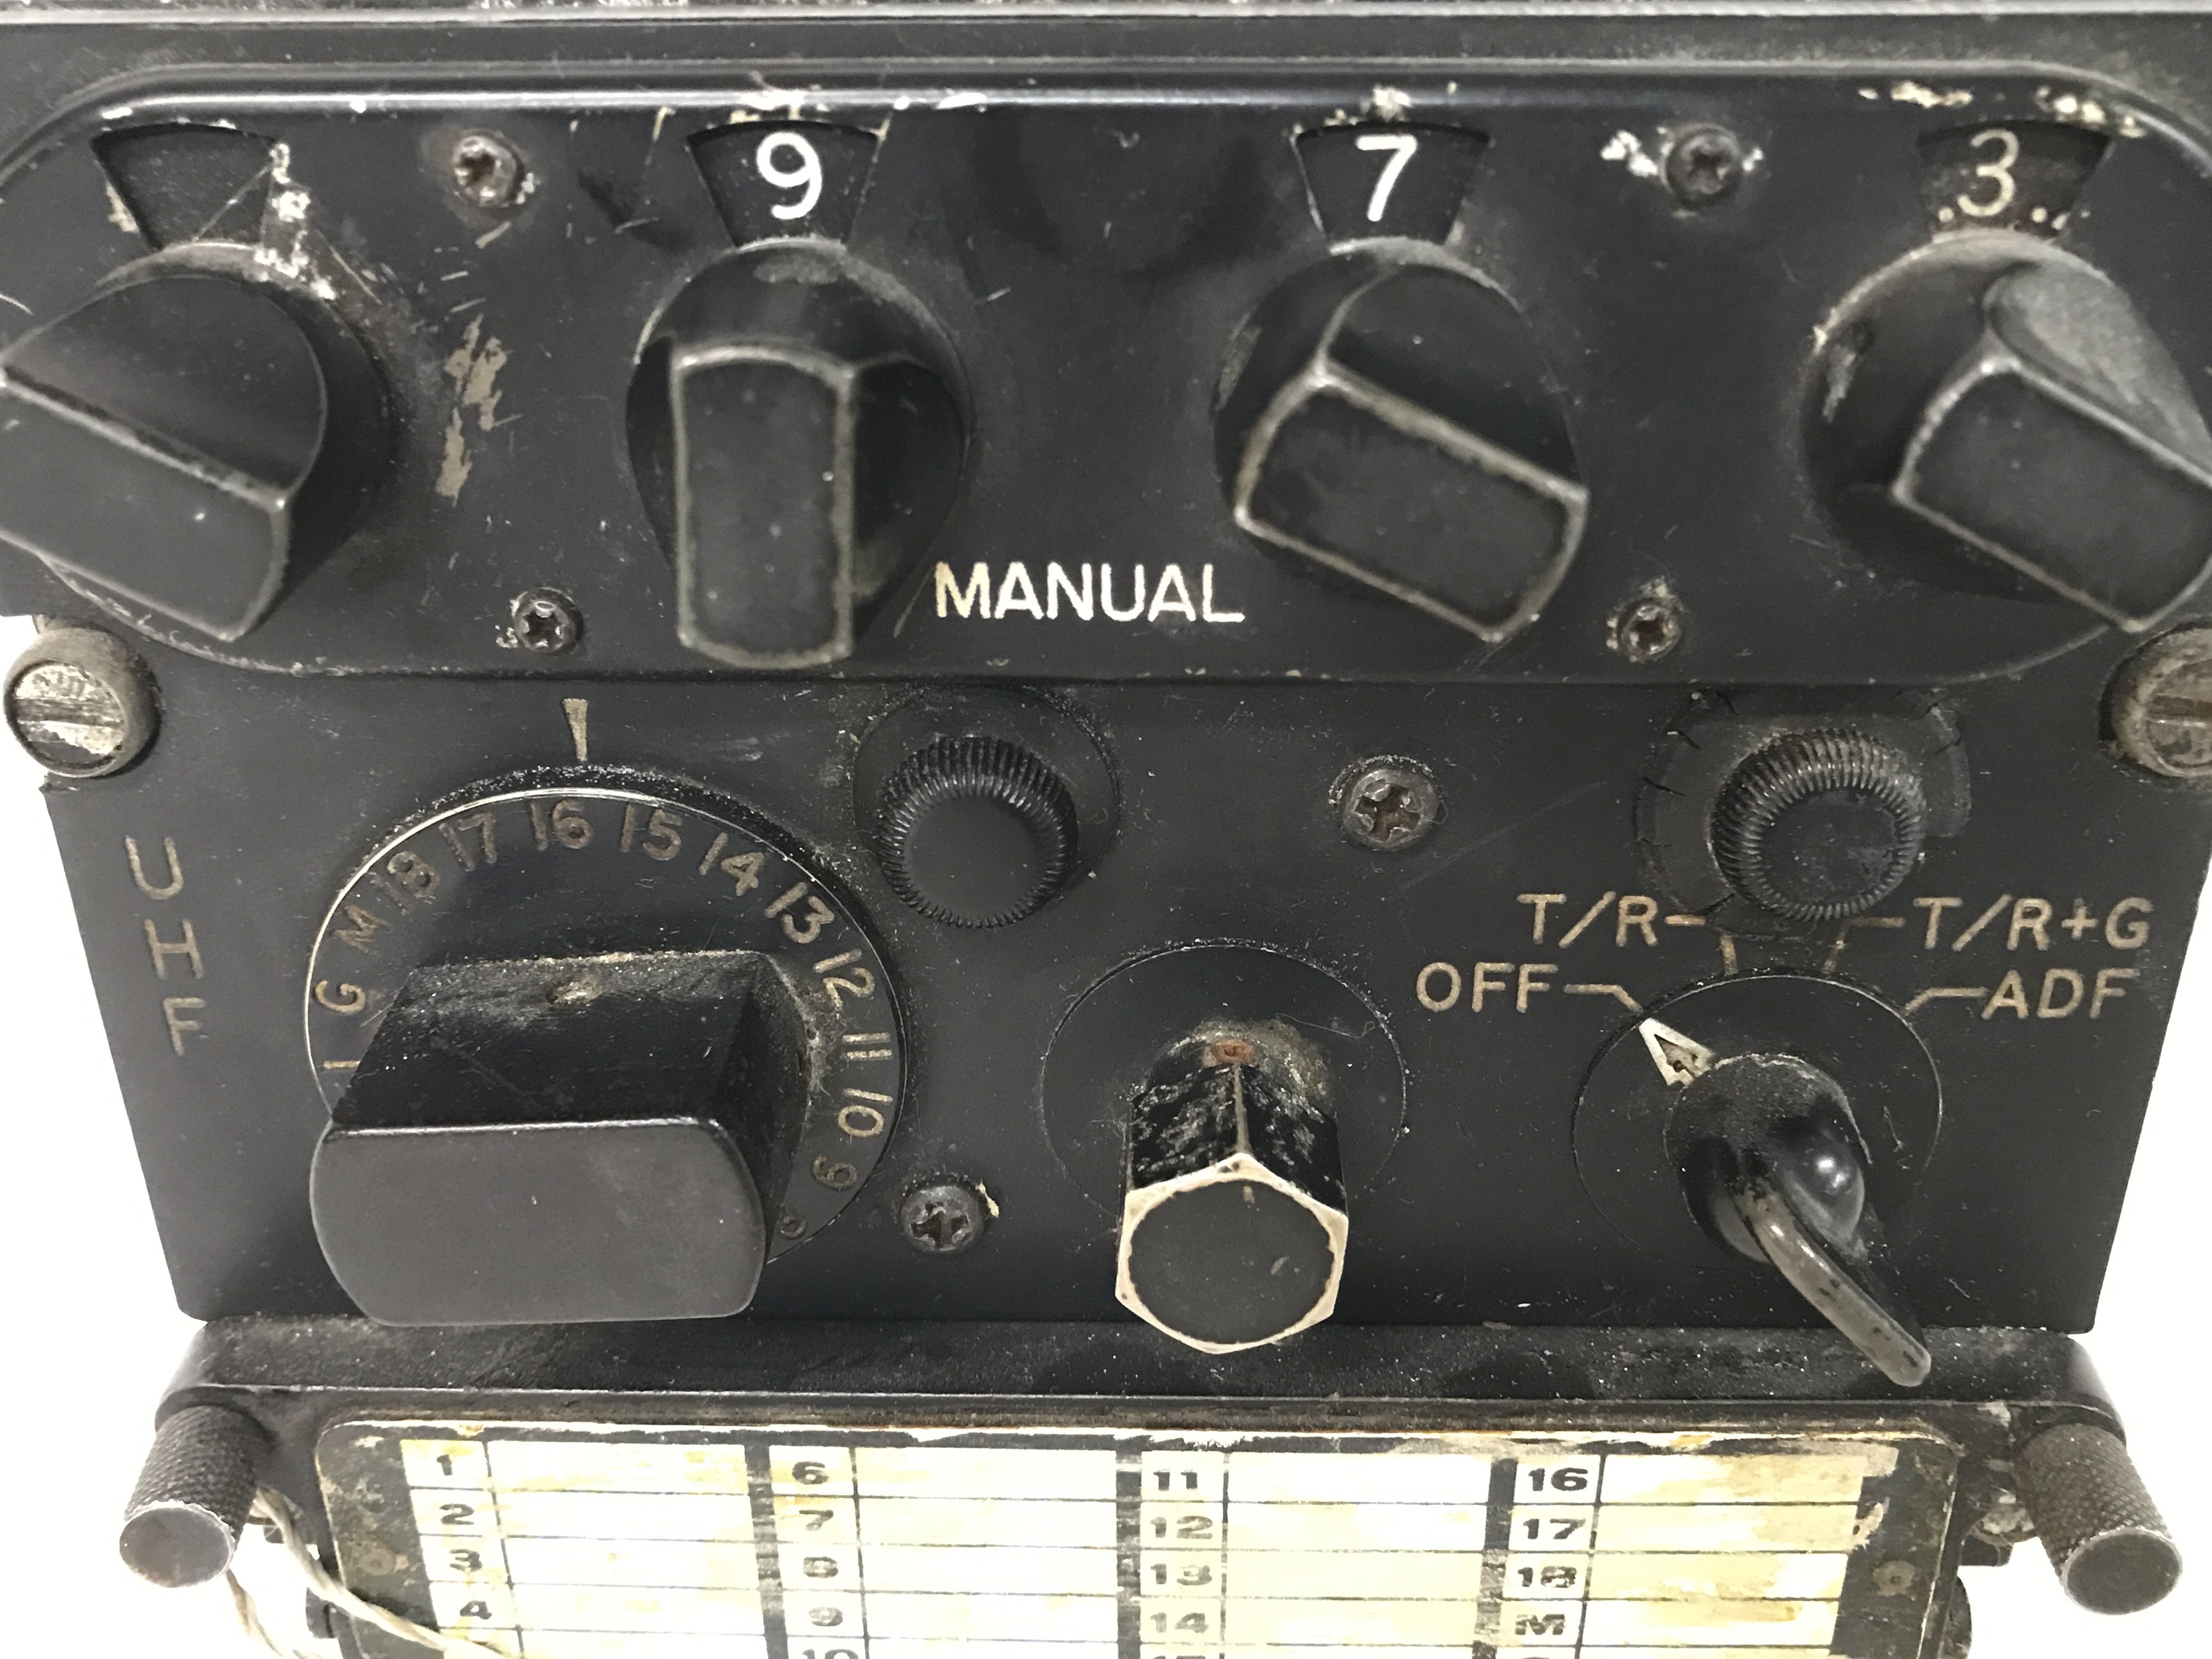 A VHF radio out of a Vulcan Bomber - Image 2 of 5